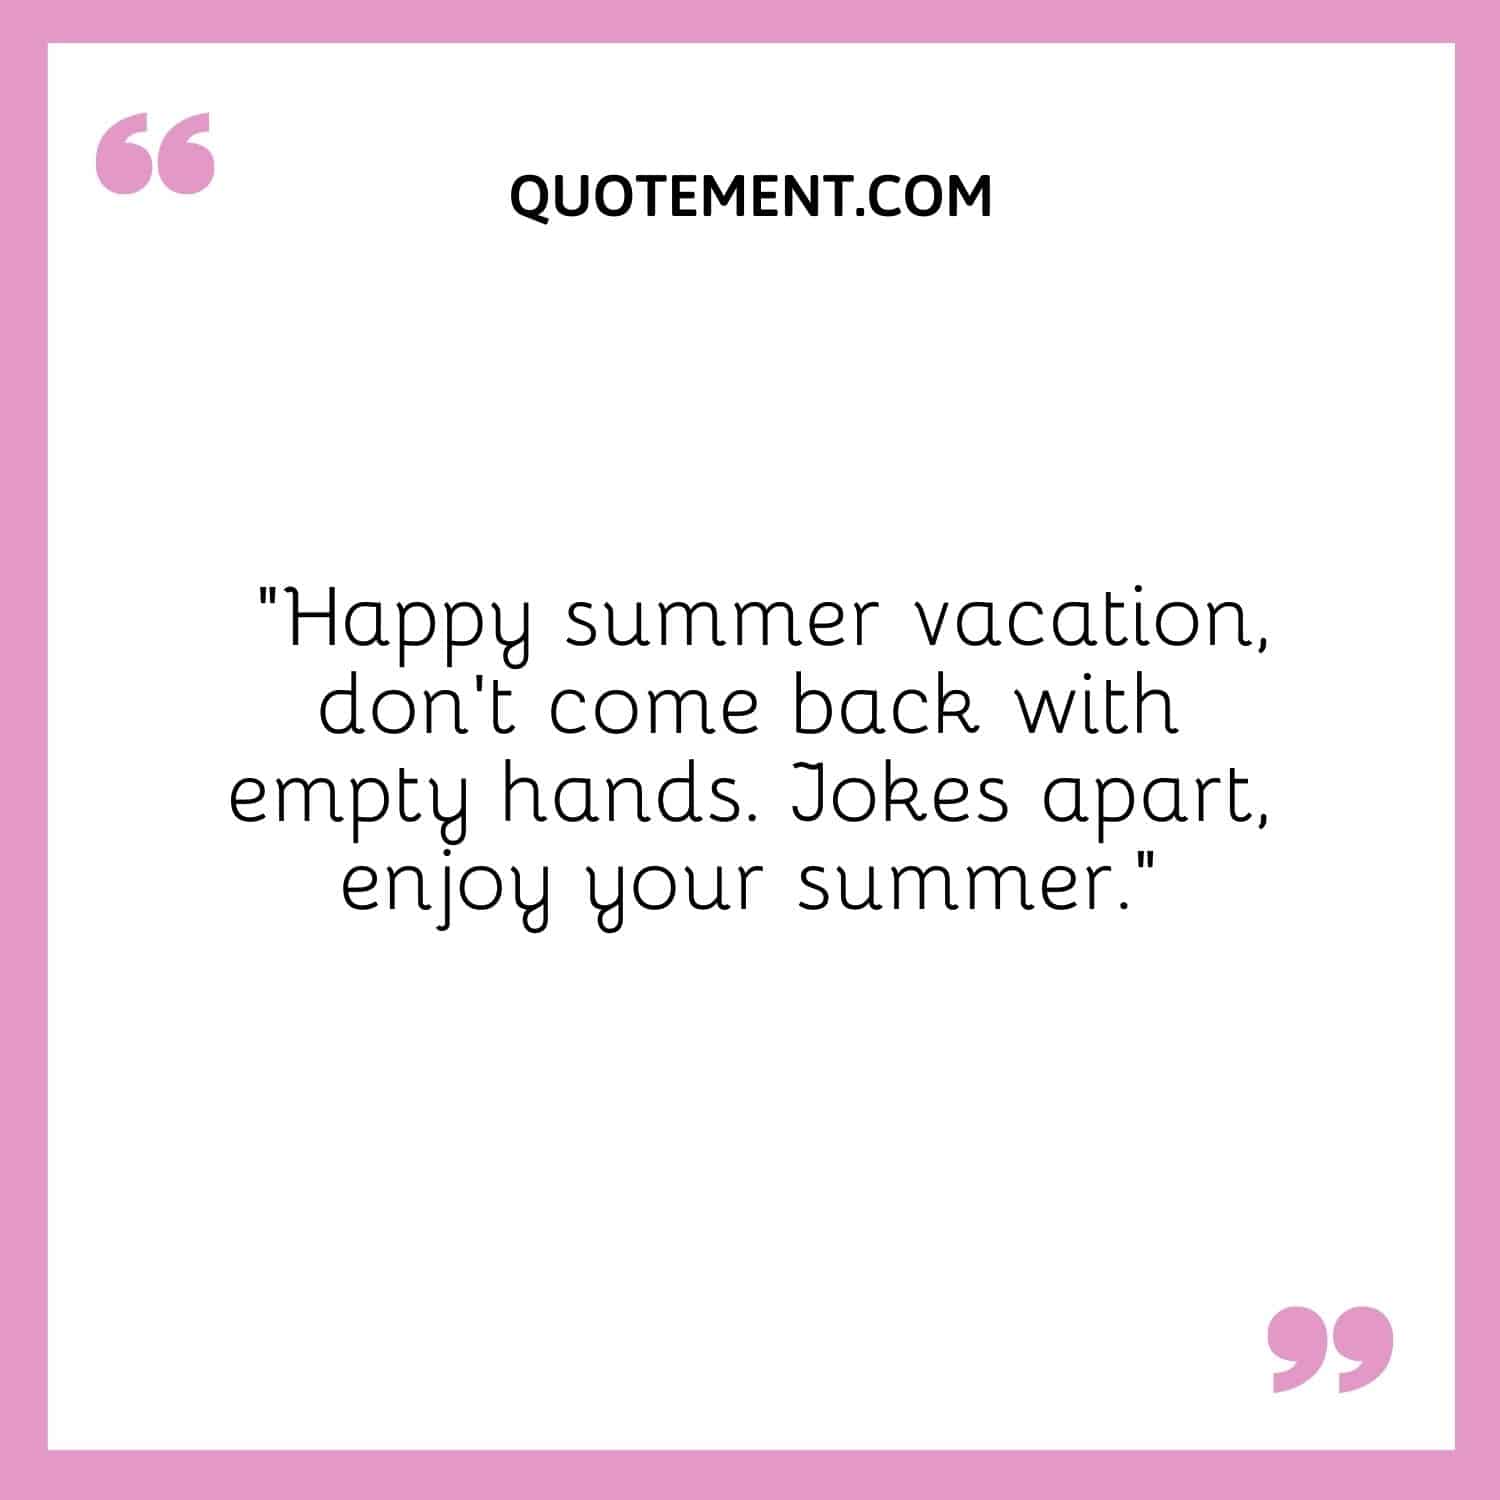 Happy summer vacation, don't come back with empty hands.